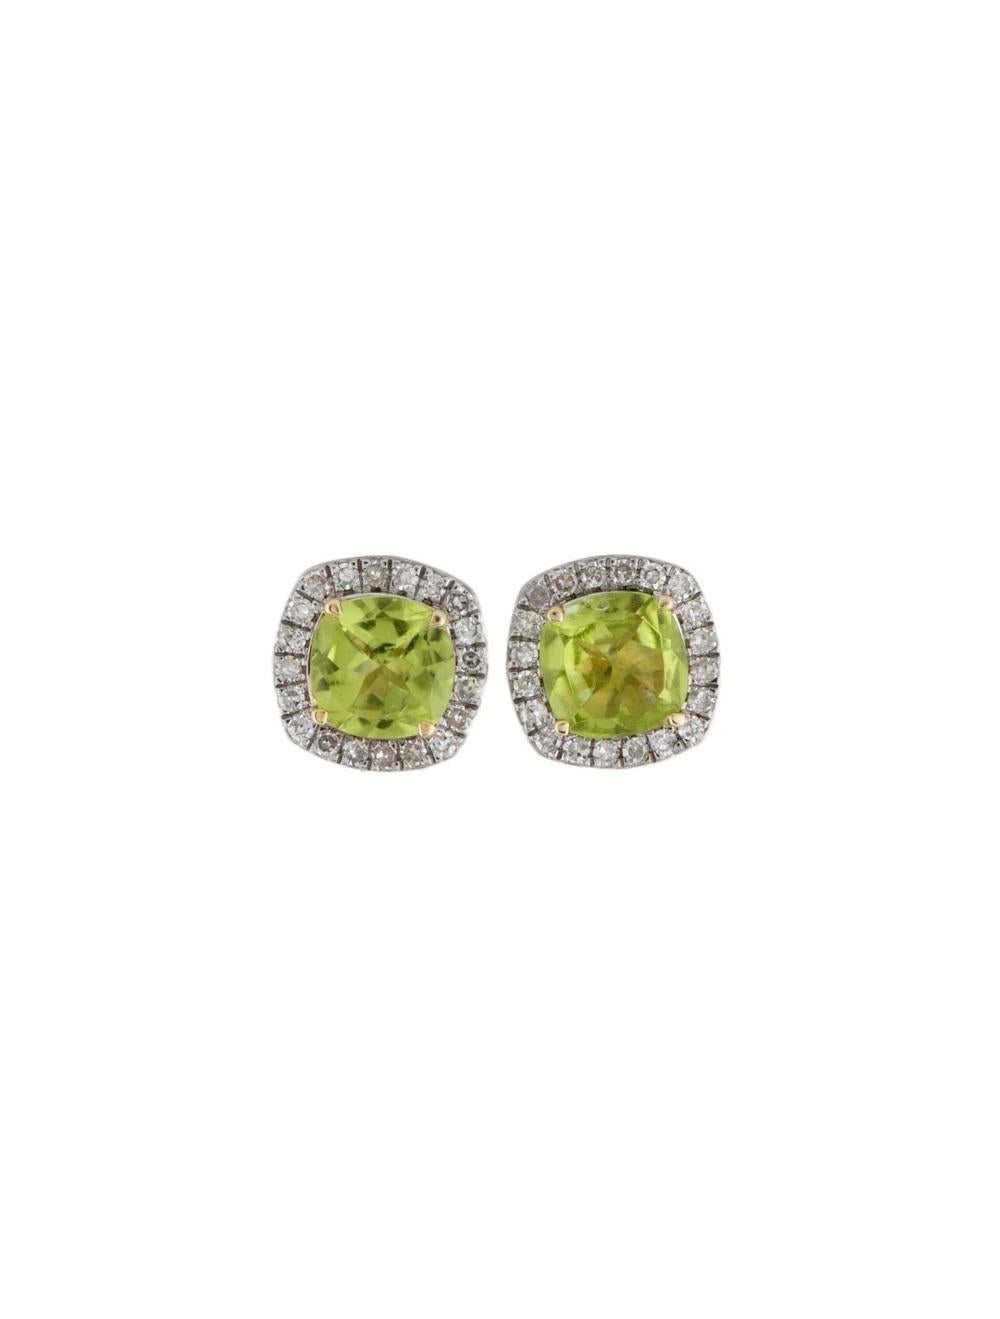 14K Peridot & Diamond Stud Earrings, 1.60ctw - Classic Design, Green Gemstones In New Condition For Sale In Holtsville, NY